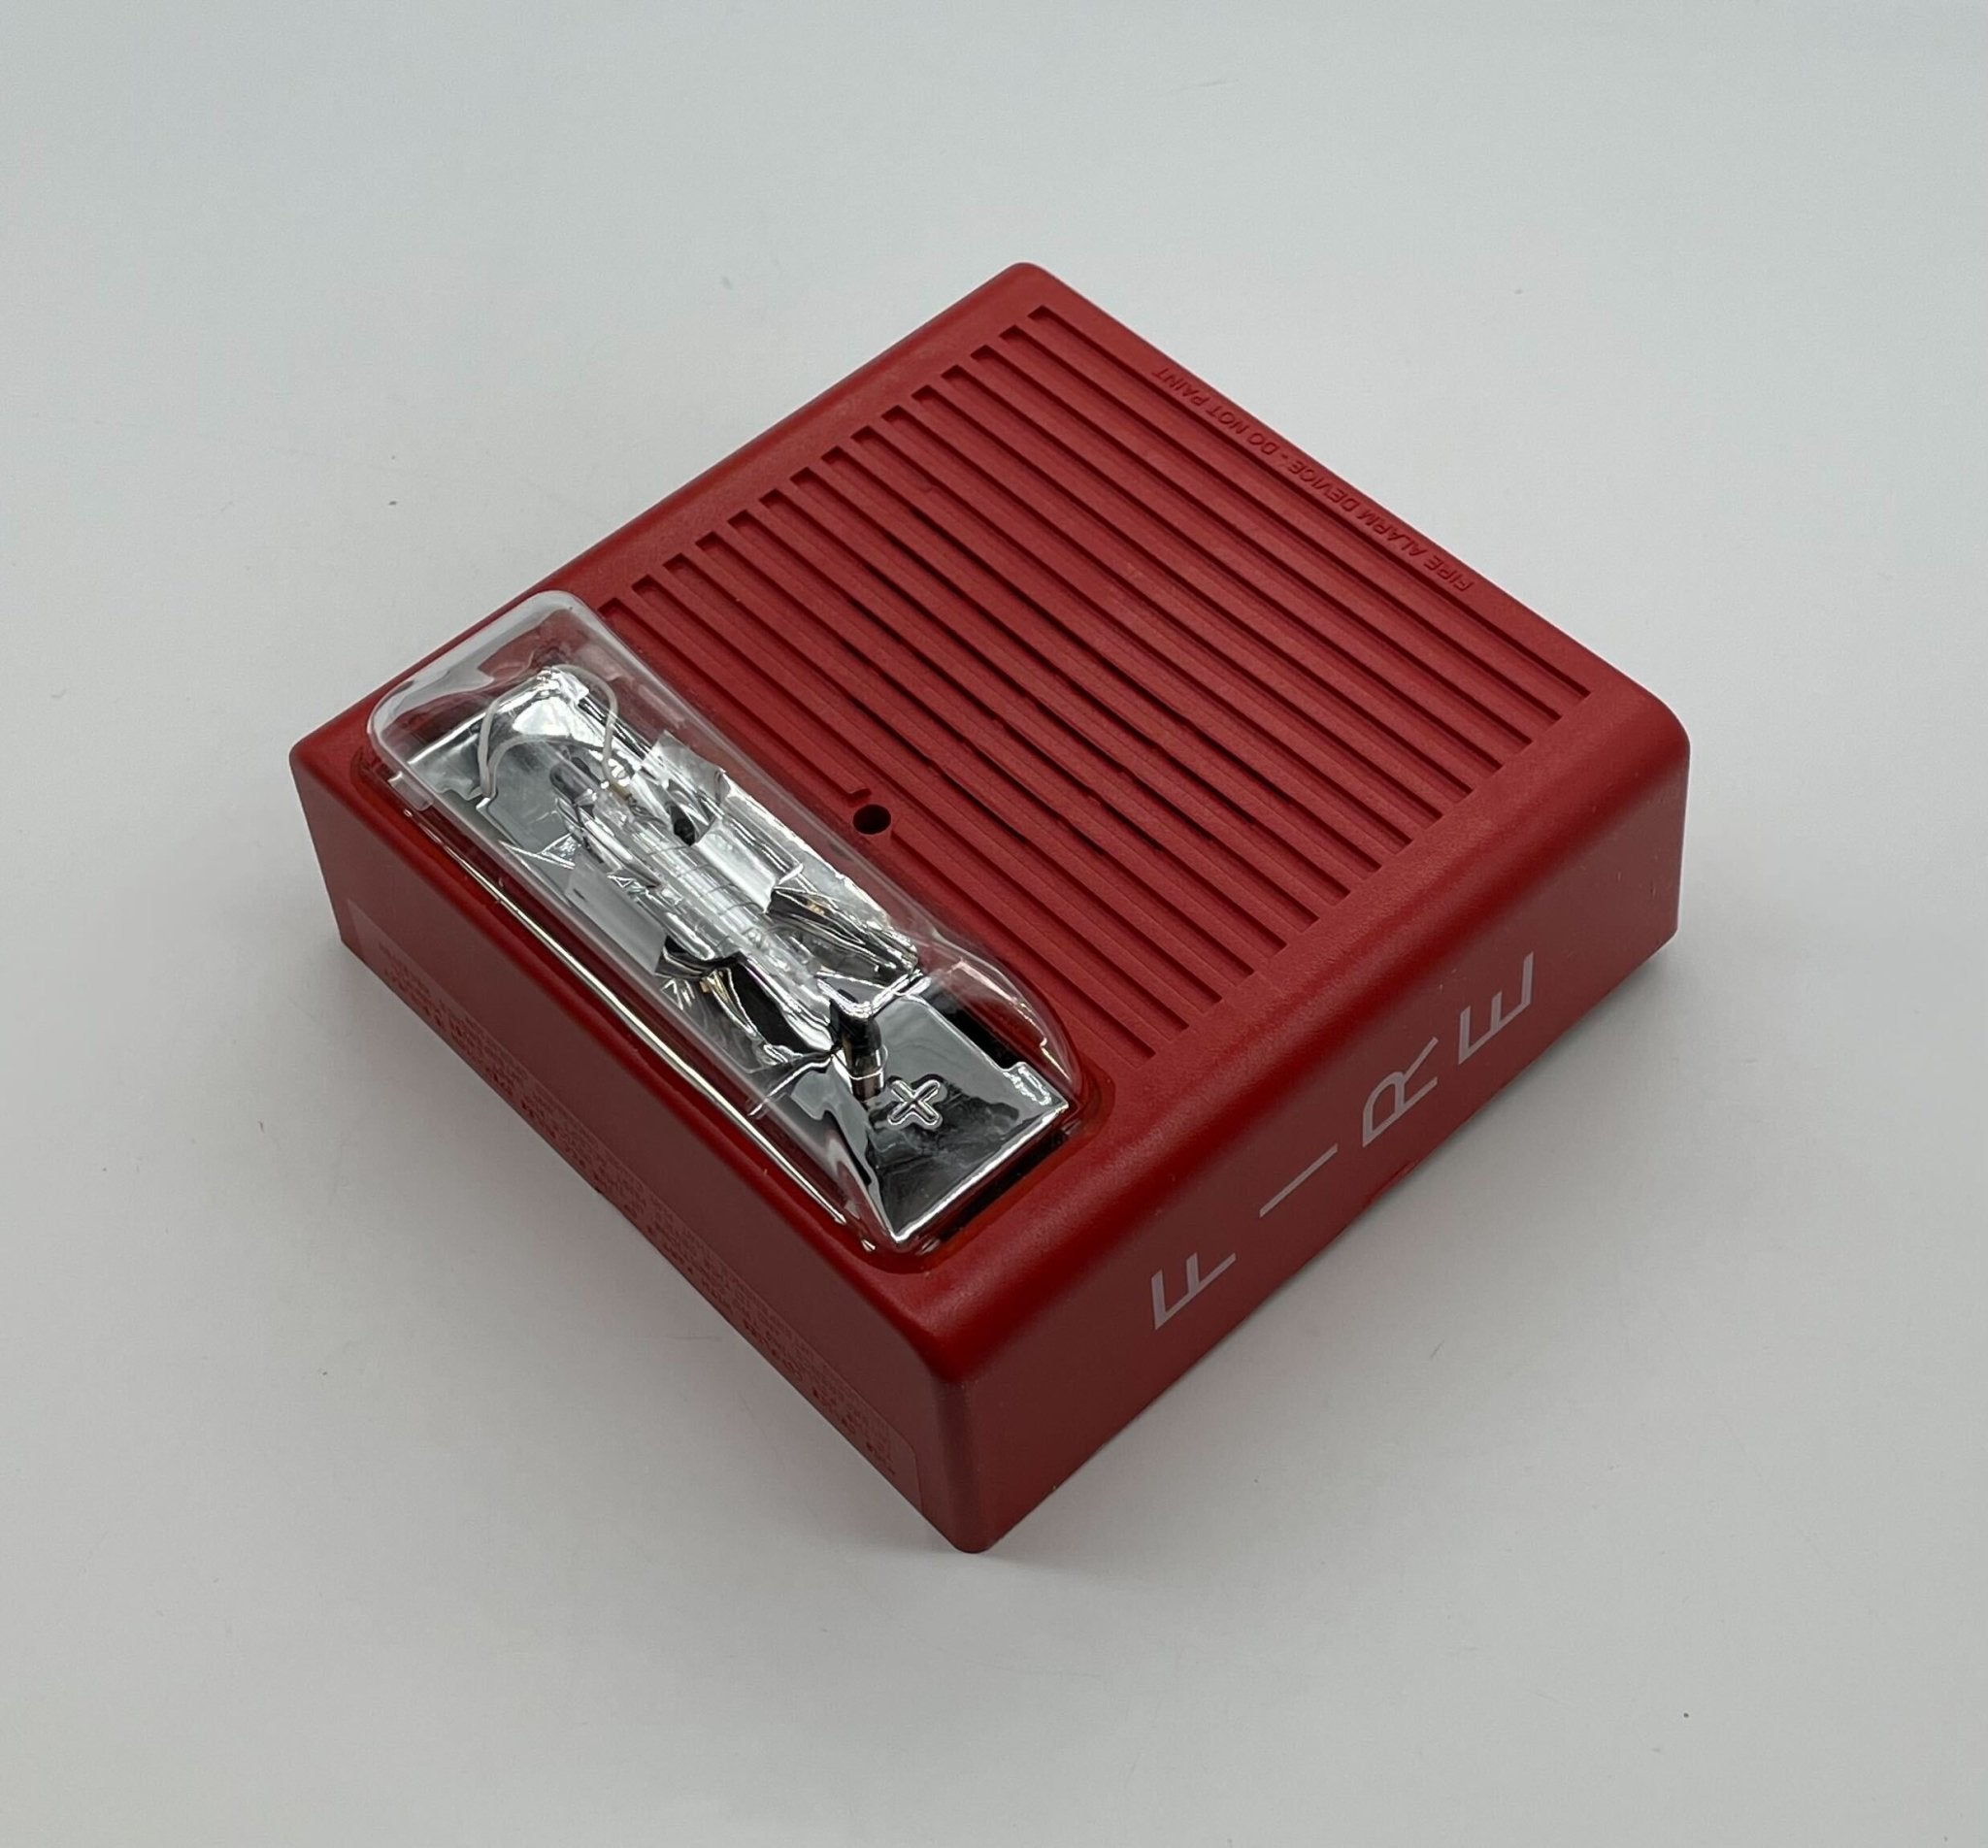 Wheelock ASWP-24MCWH-FR - The Fire Alarm Supplier